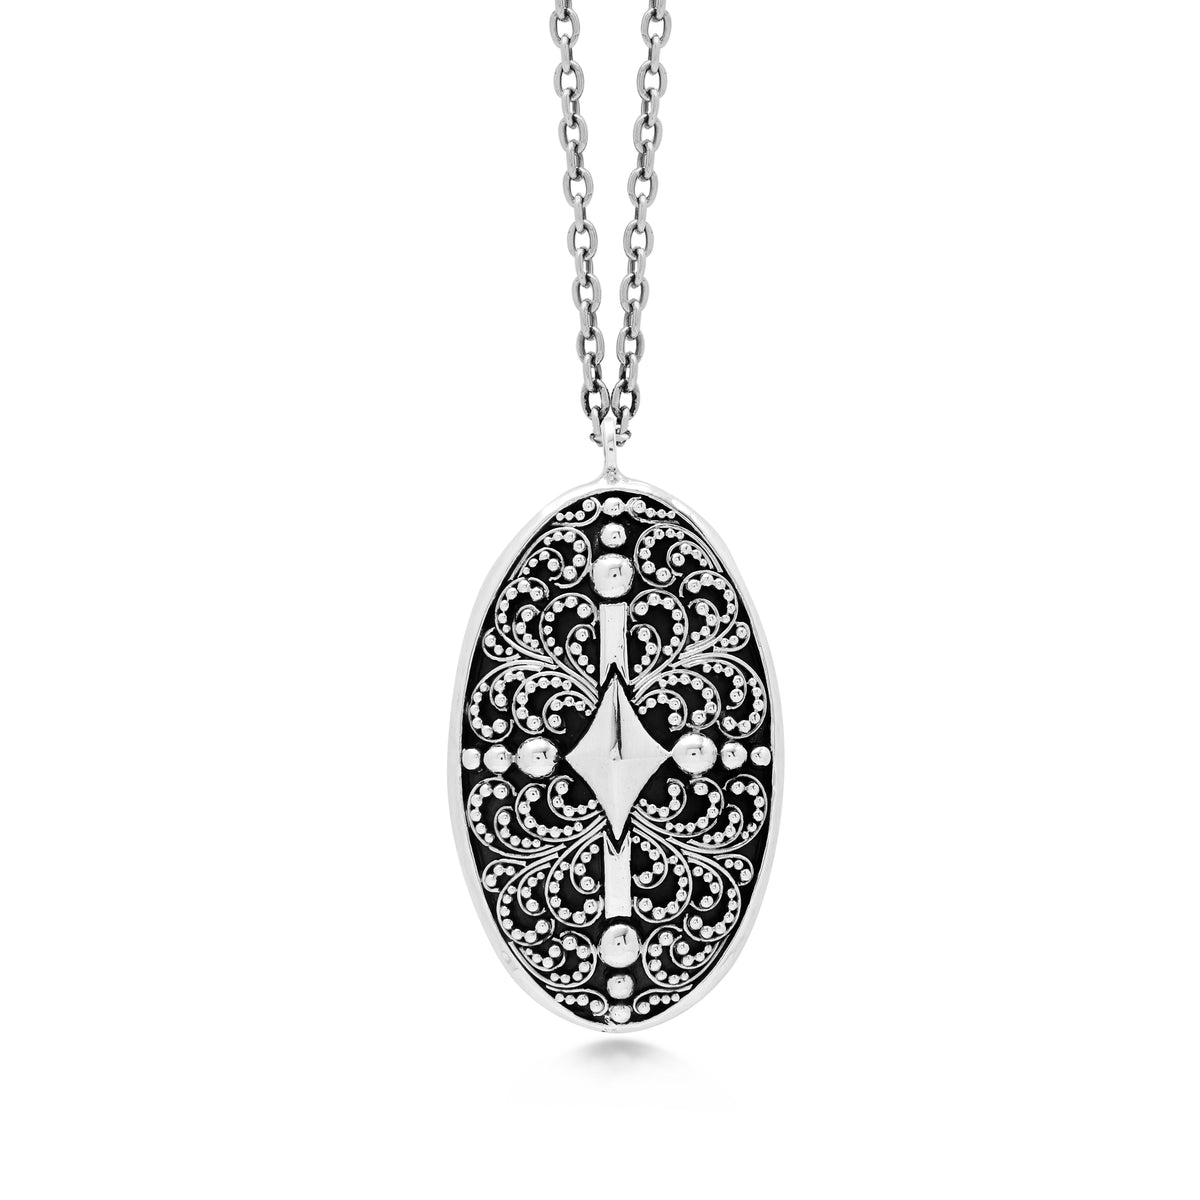 Oval Classic Granulation Alhambra Pendant Necklace - Lois Hill Jewelry